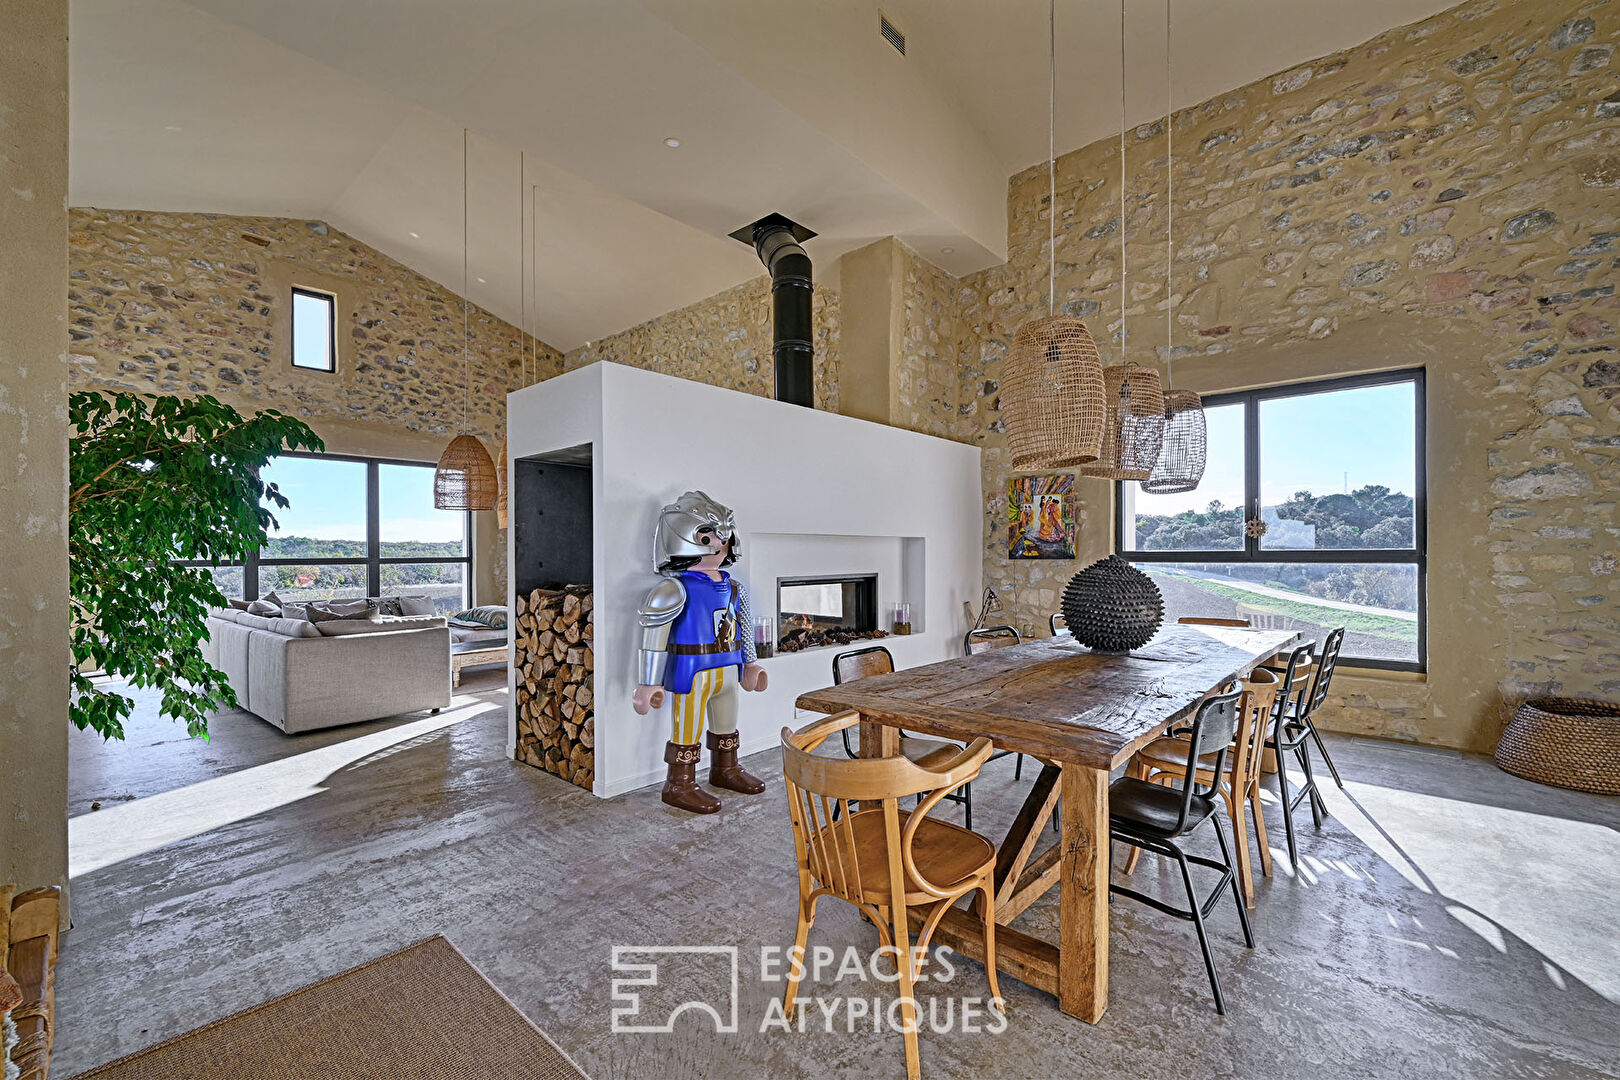 Sublime renovated loft-style sheepfold with view